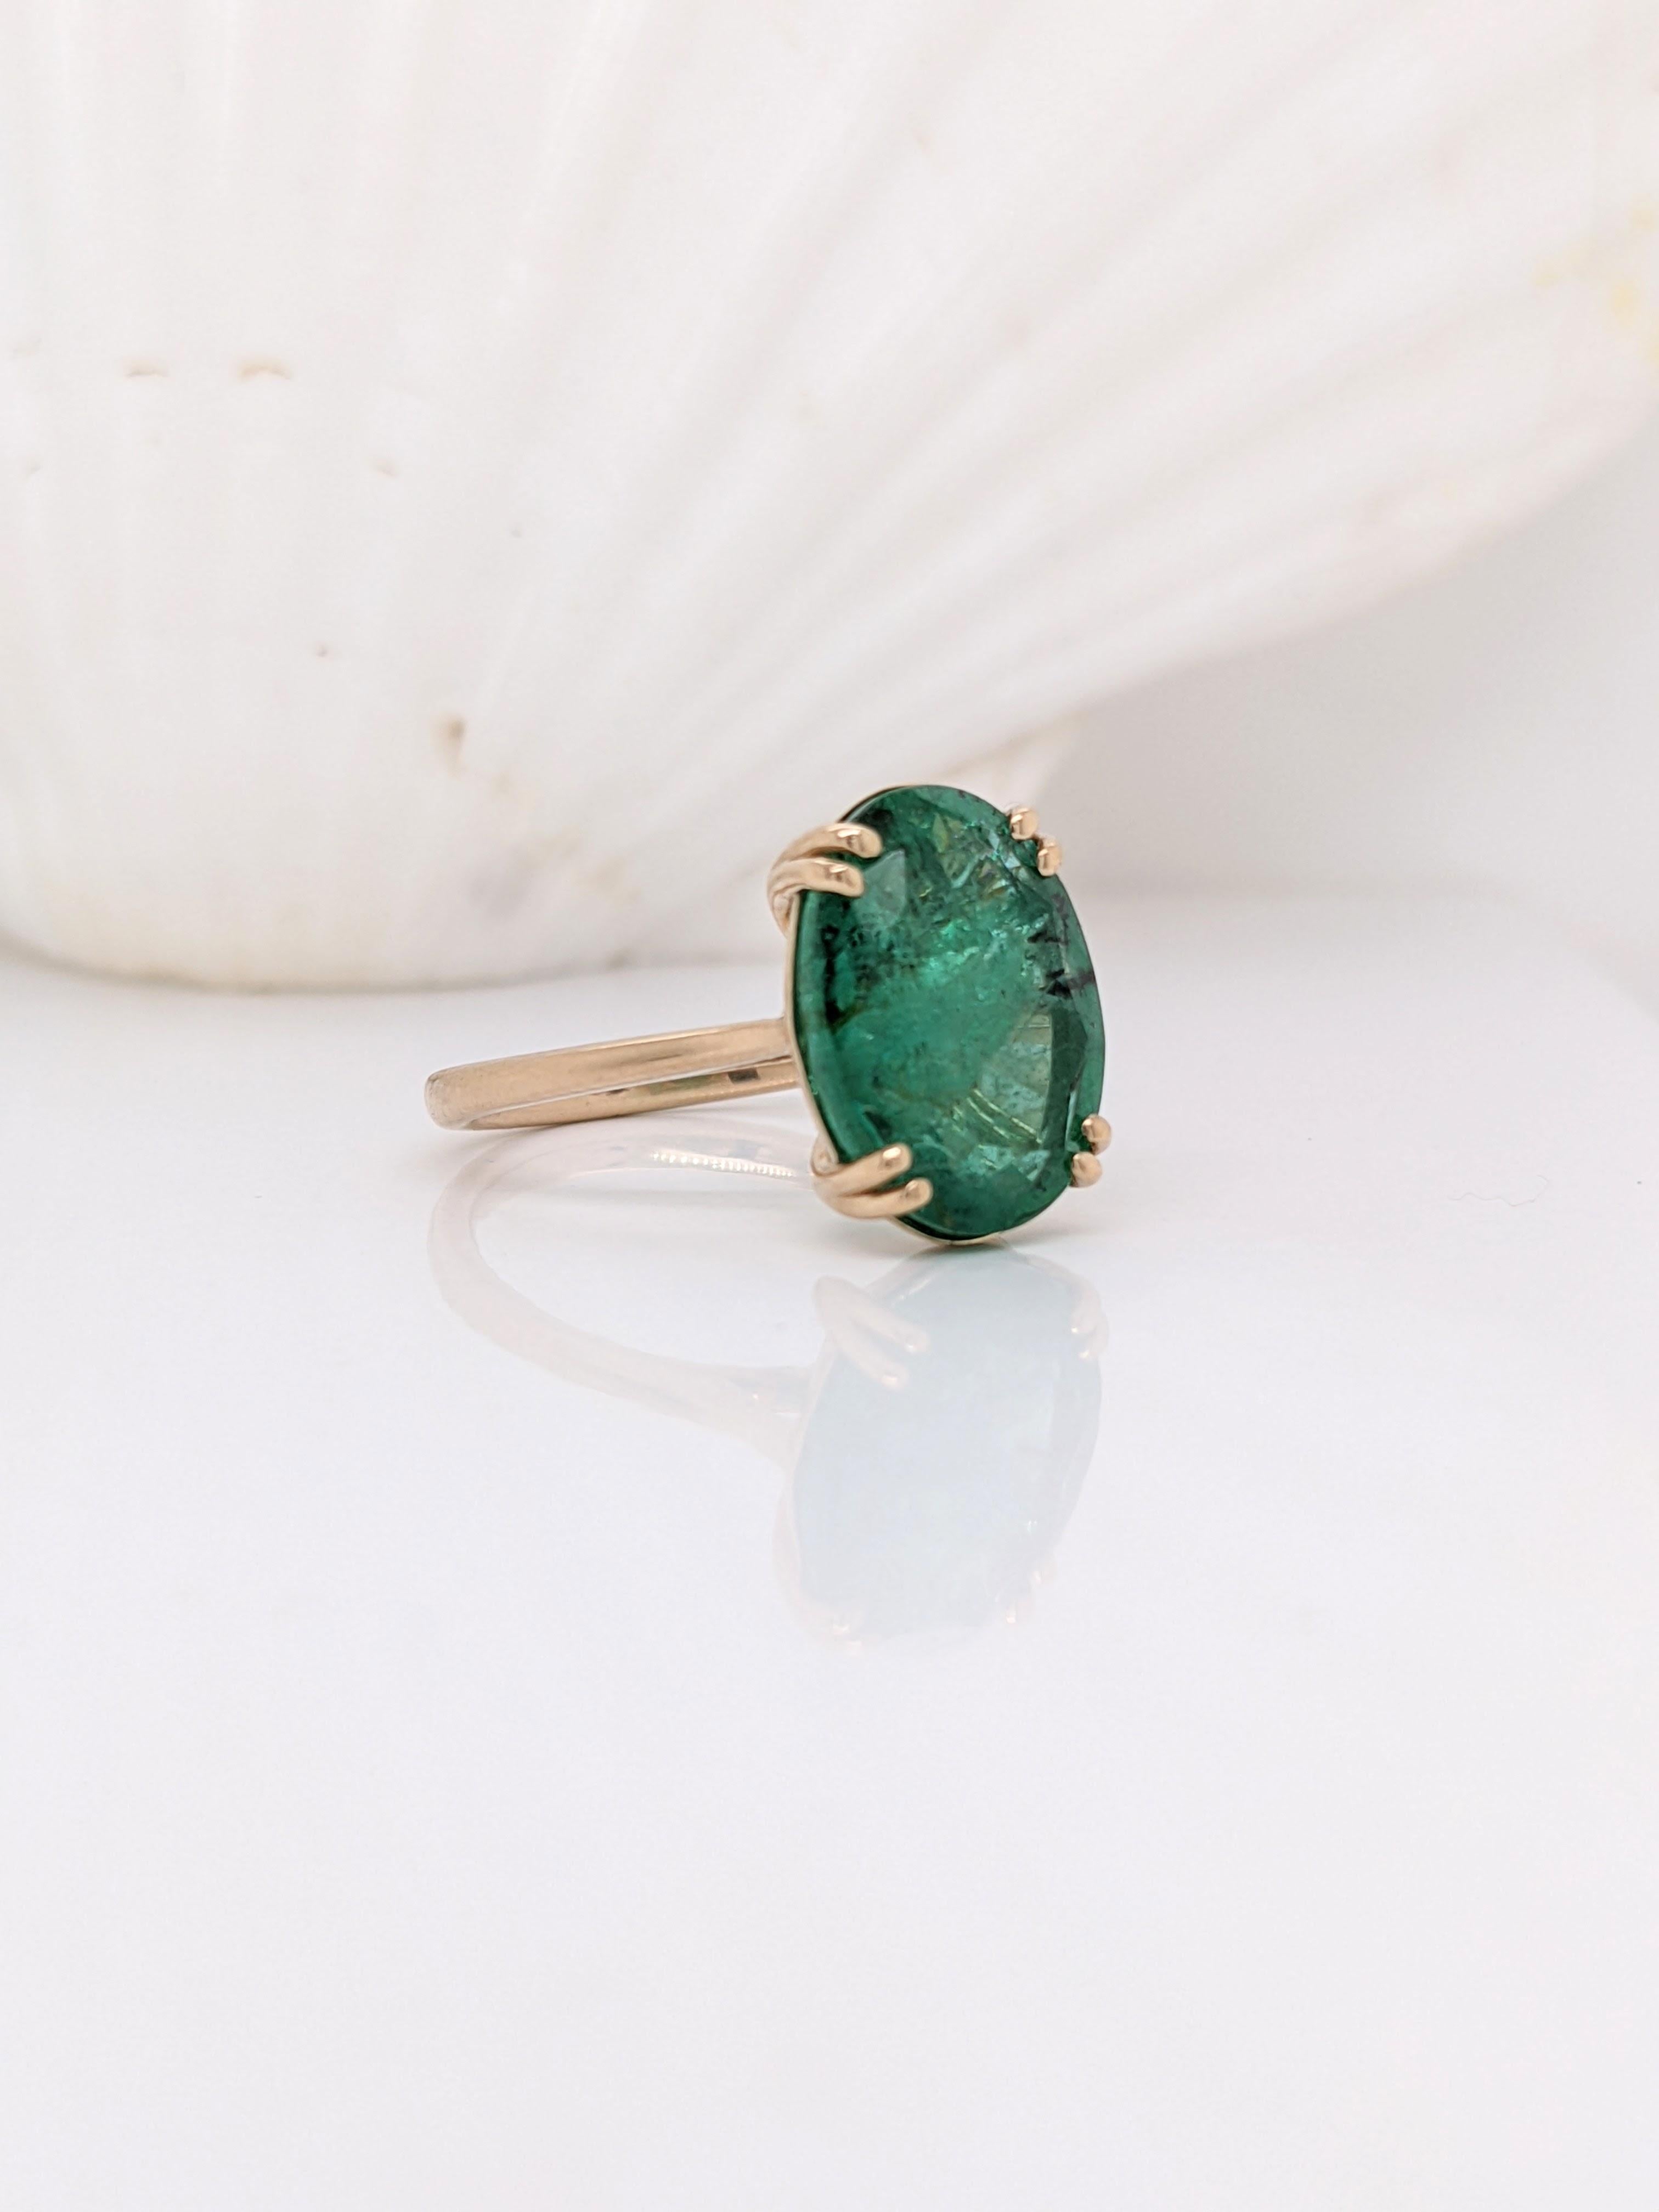 This large oval cut Zambian emerald draws you into to the depths of its intricate inclusions. A clean and minimalist setting in solid 14k yellow gold with a double prong setting and slightly tapered shank. A minimalist ring design perfect for an